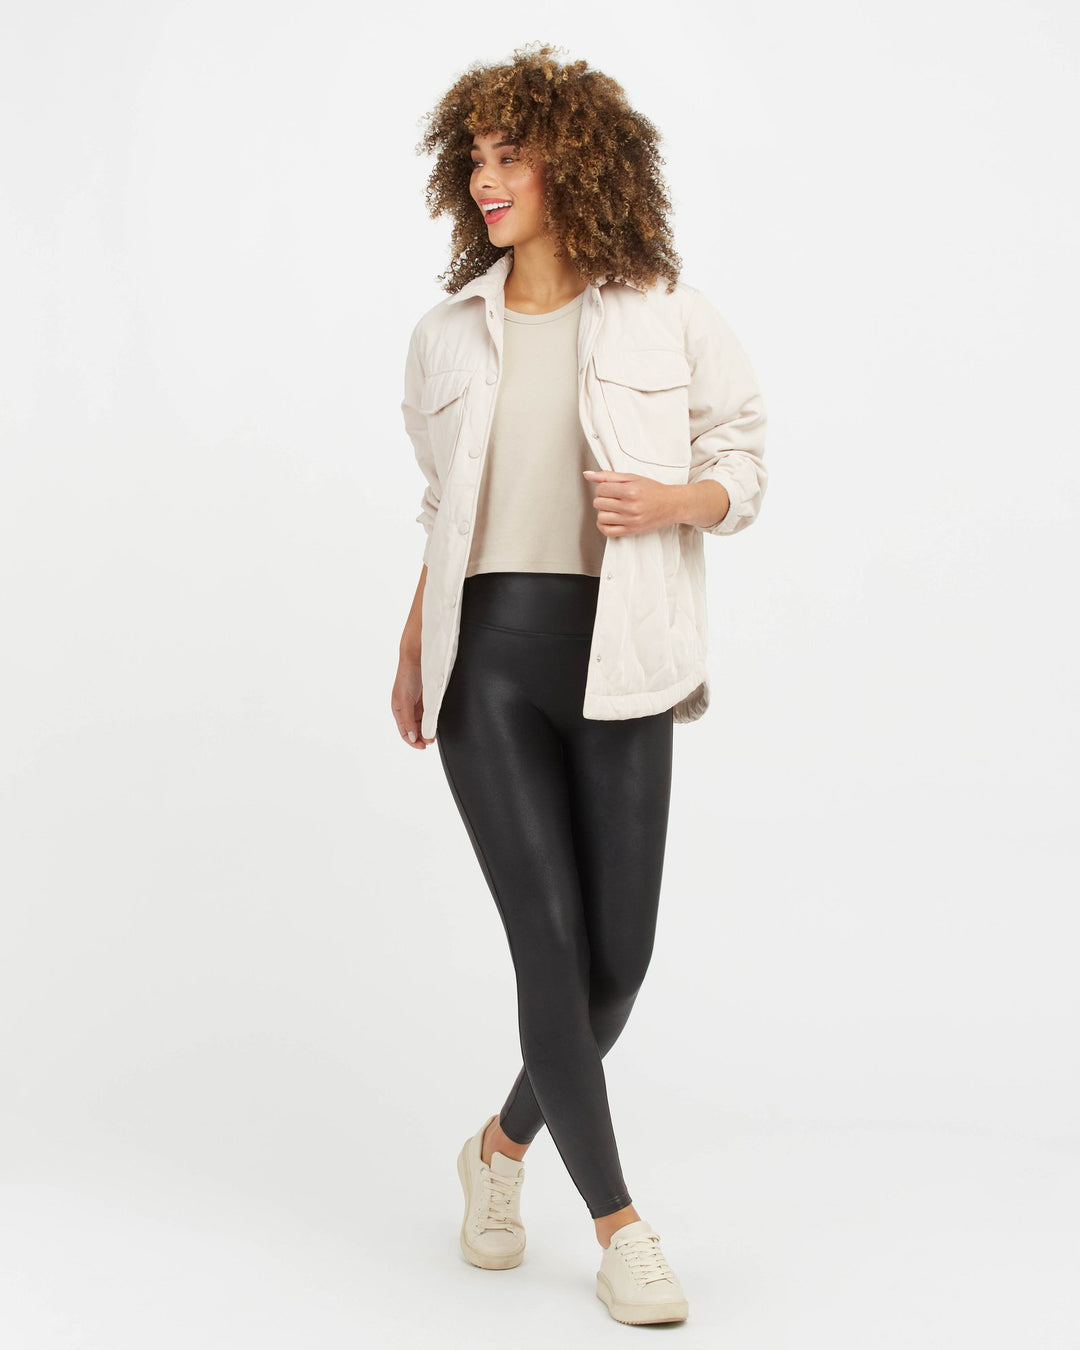 SPANX - Don't faux-get, our Faux Leather Leggings come in